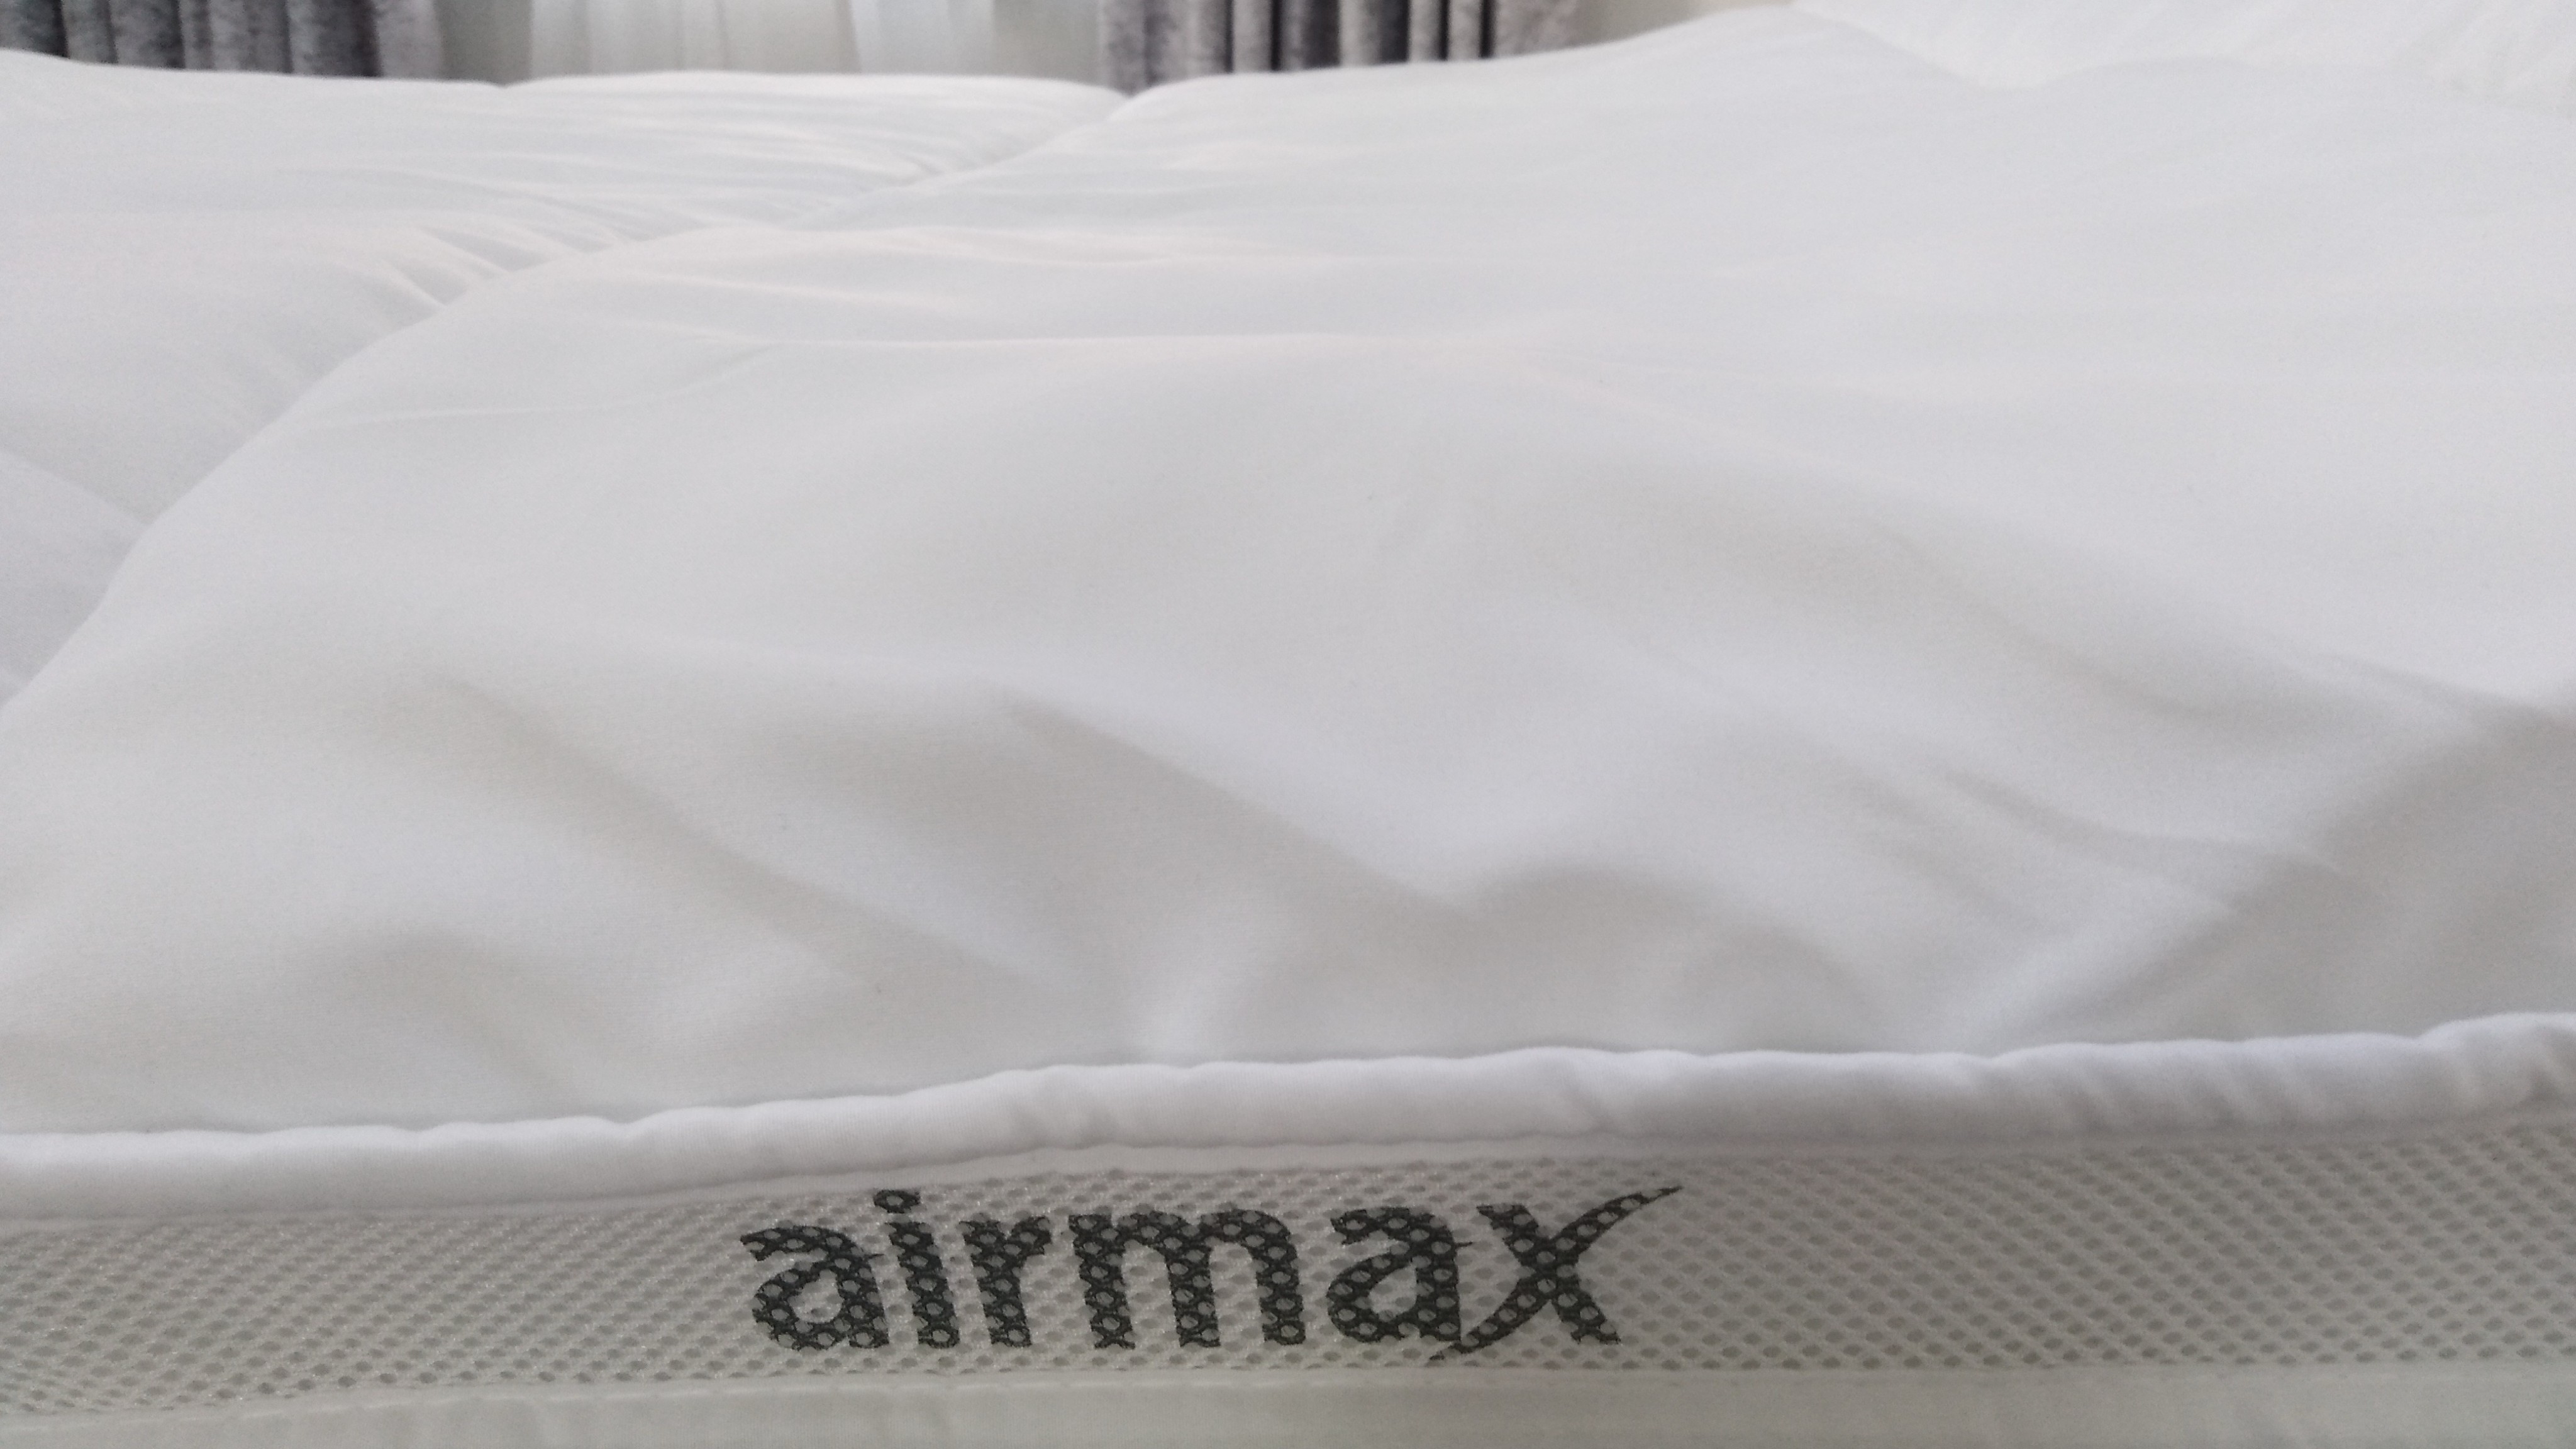 Silentnight Airmax duvet review: this surprise hit takes airflow to the ...